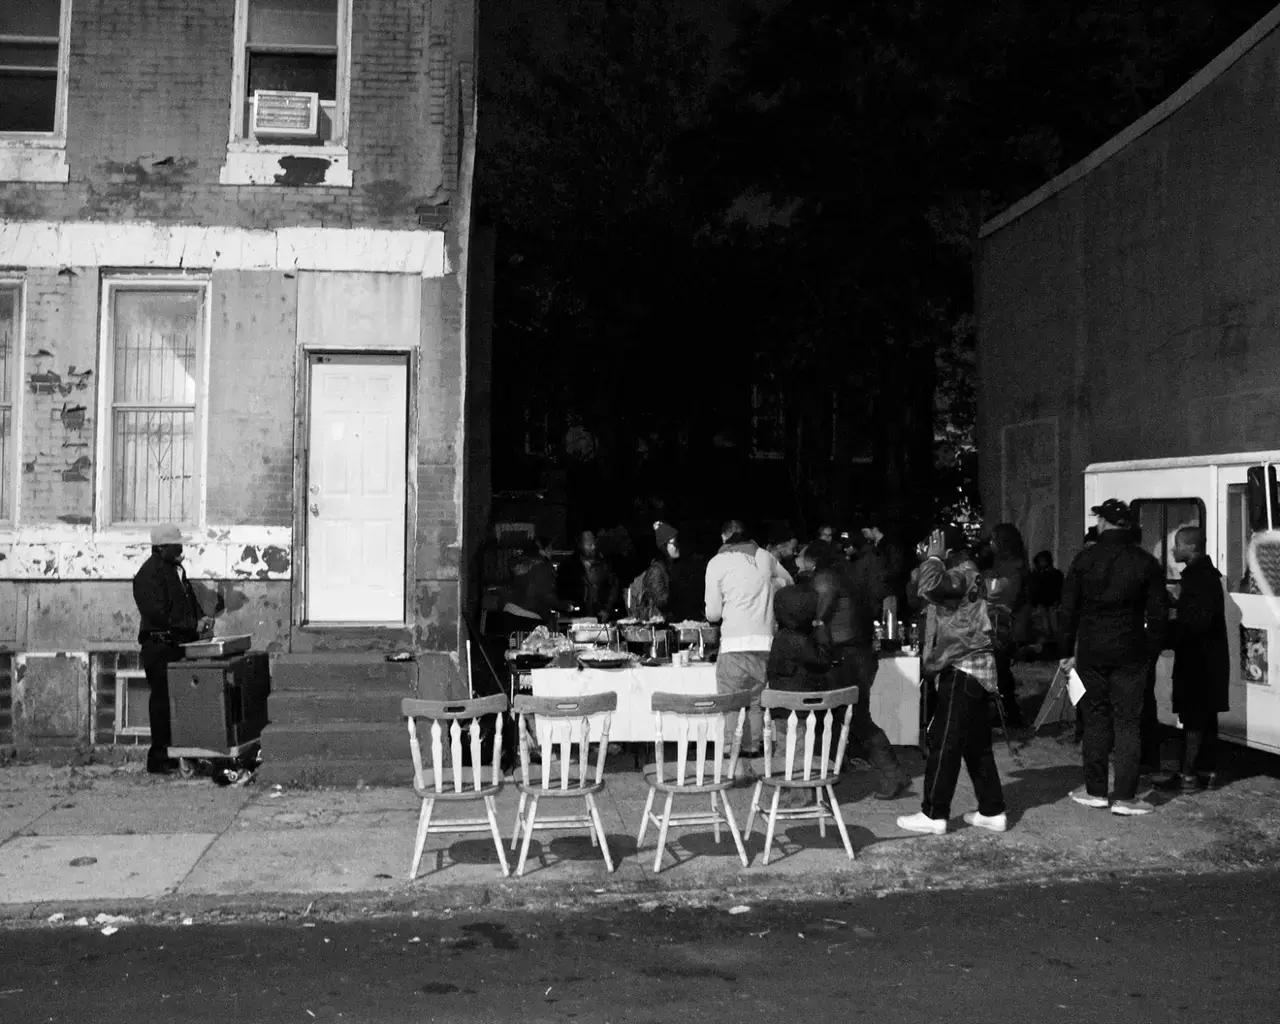 A Lot More Historical, an oral history and memory mapping block party to share memories and consider ideas for History Truck&#39;s 2015 exhibition, presented in collaboration with Temple University&#39;s Center for Public History, the Free Breakfast Program collective, artists Theodore A. Harris and Tim Portlock, and the neighbors of North 13th Street and Cumberland Street in North Philadelphia. Photo by Jill Saull.